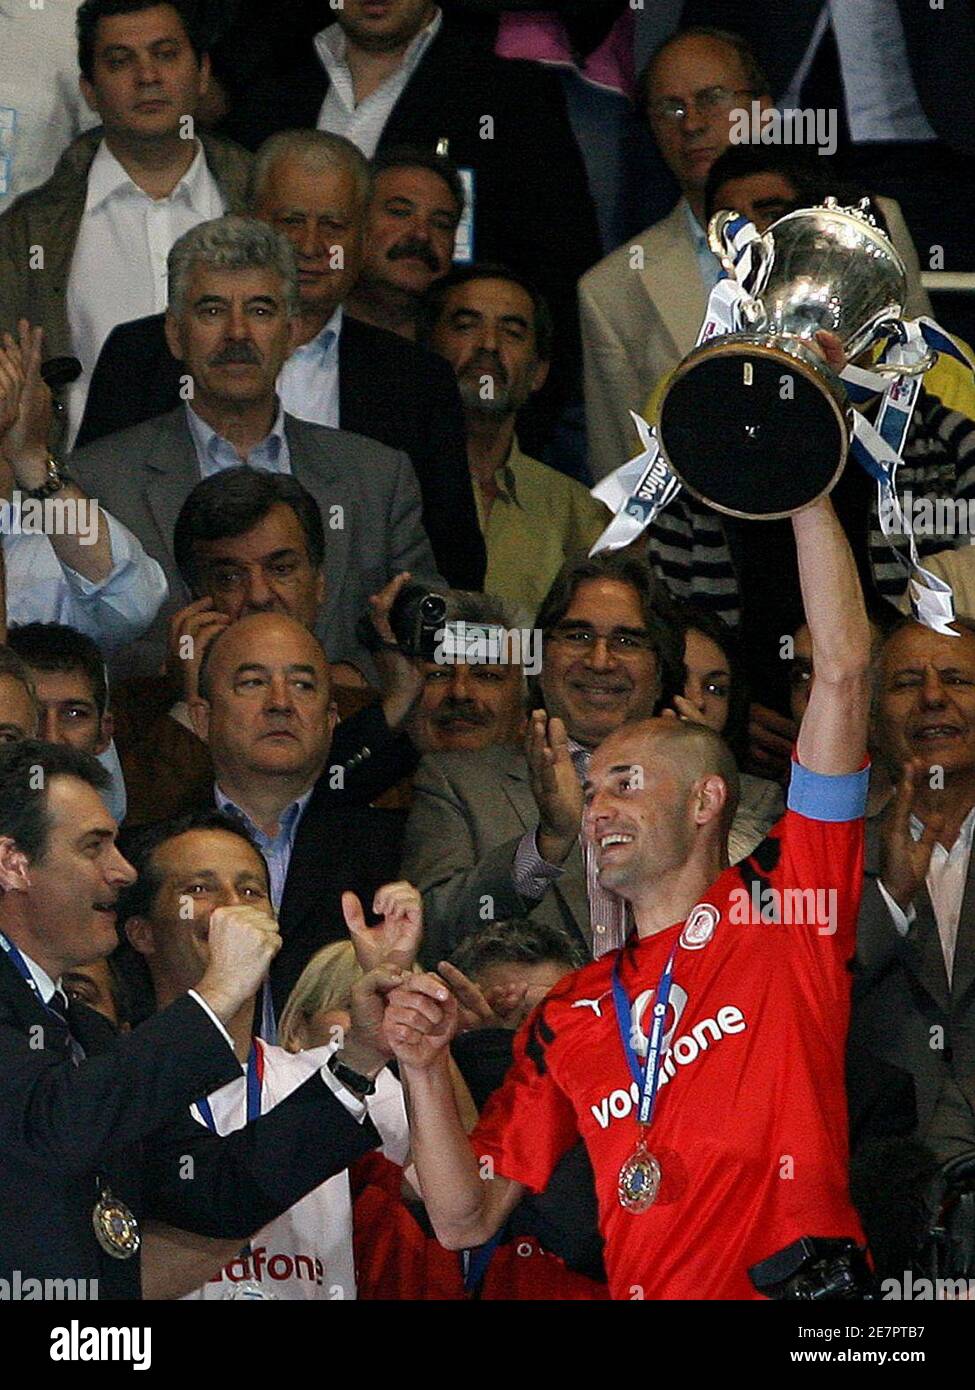 Olympiakos' captain Predrag Djordjevic raises the Greek Cup trophy after  their final match against Aris Thessaloniki in the northern town of  Thessaloniki May 17, 2008. REUTERS/Icon/Panagiotis Tzamaros (GREECE Stock  Photo - Alamy